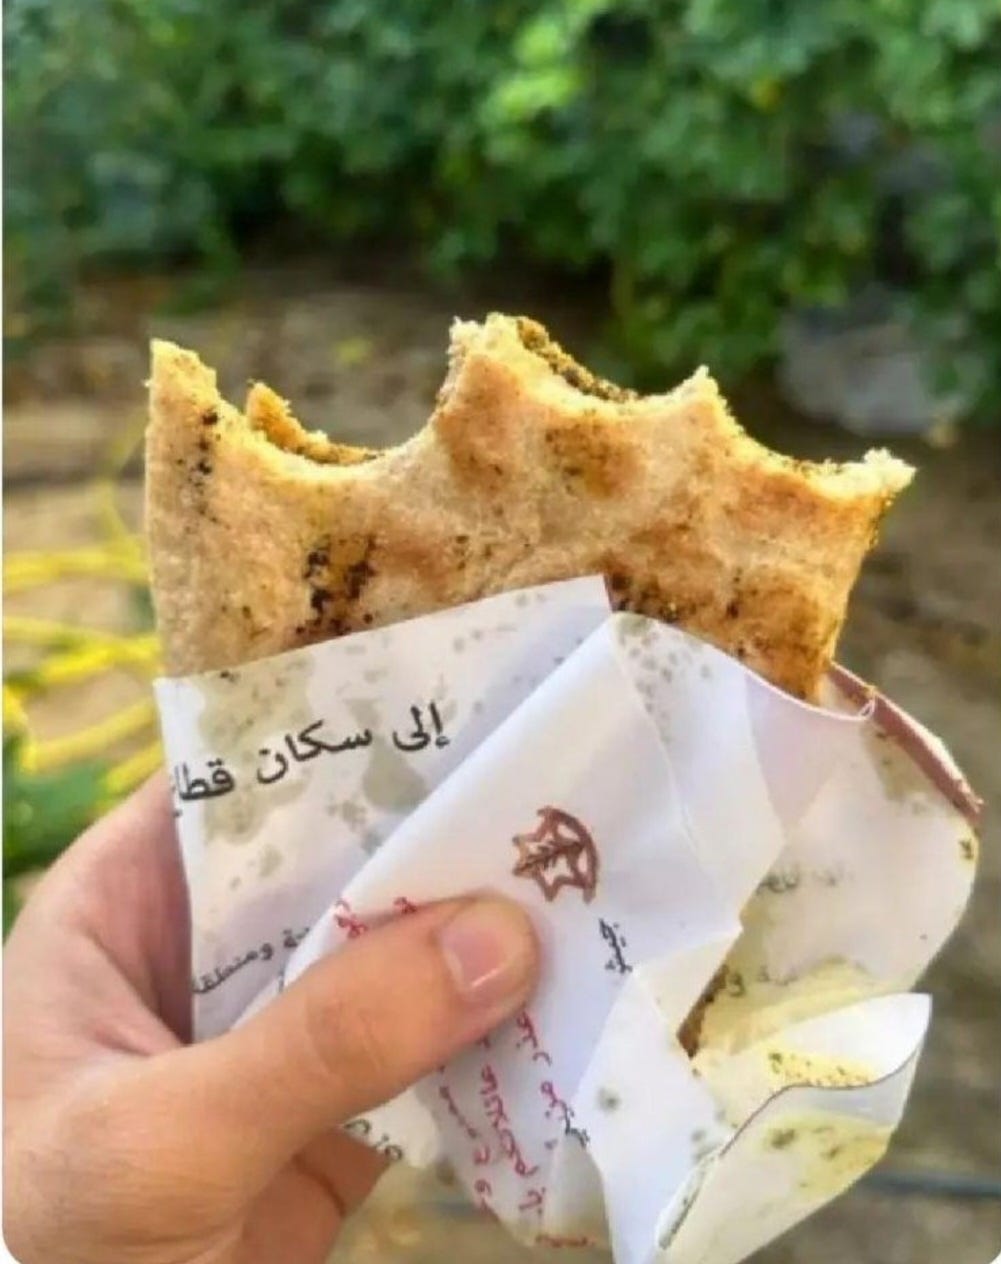 Colonial leaflets from Israel used to make sandwich wraps